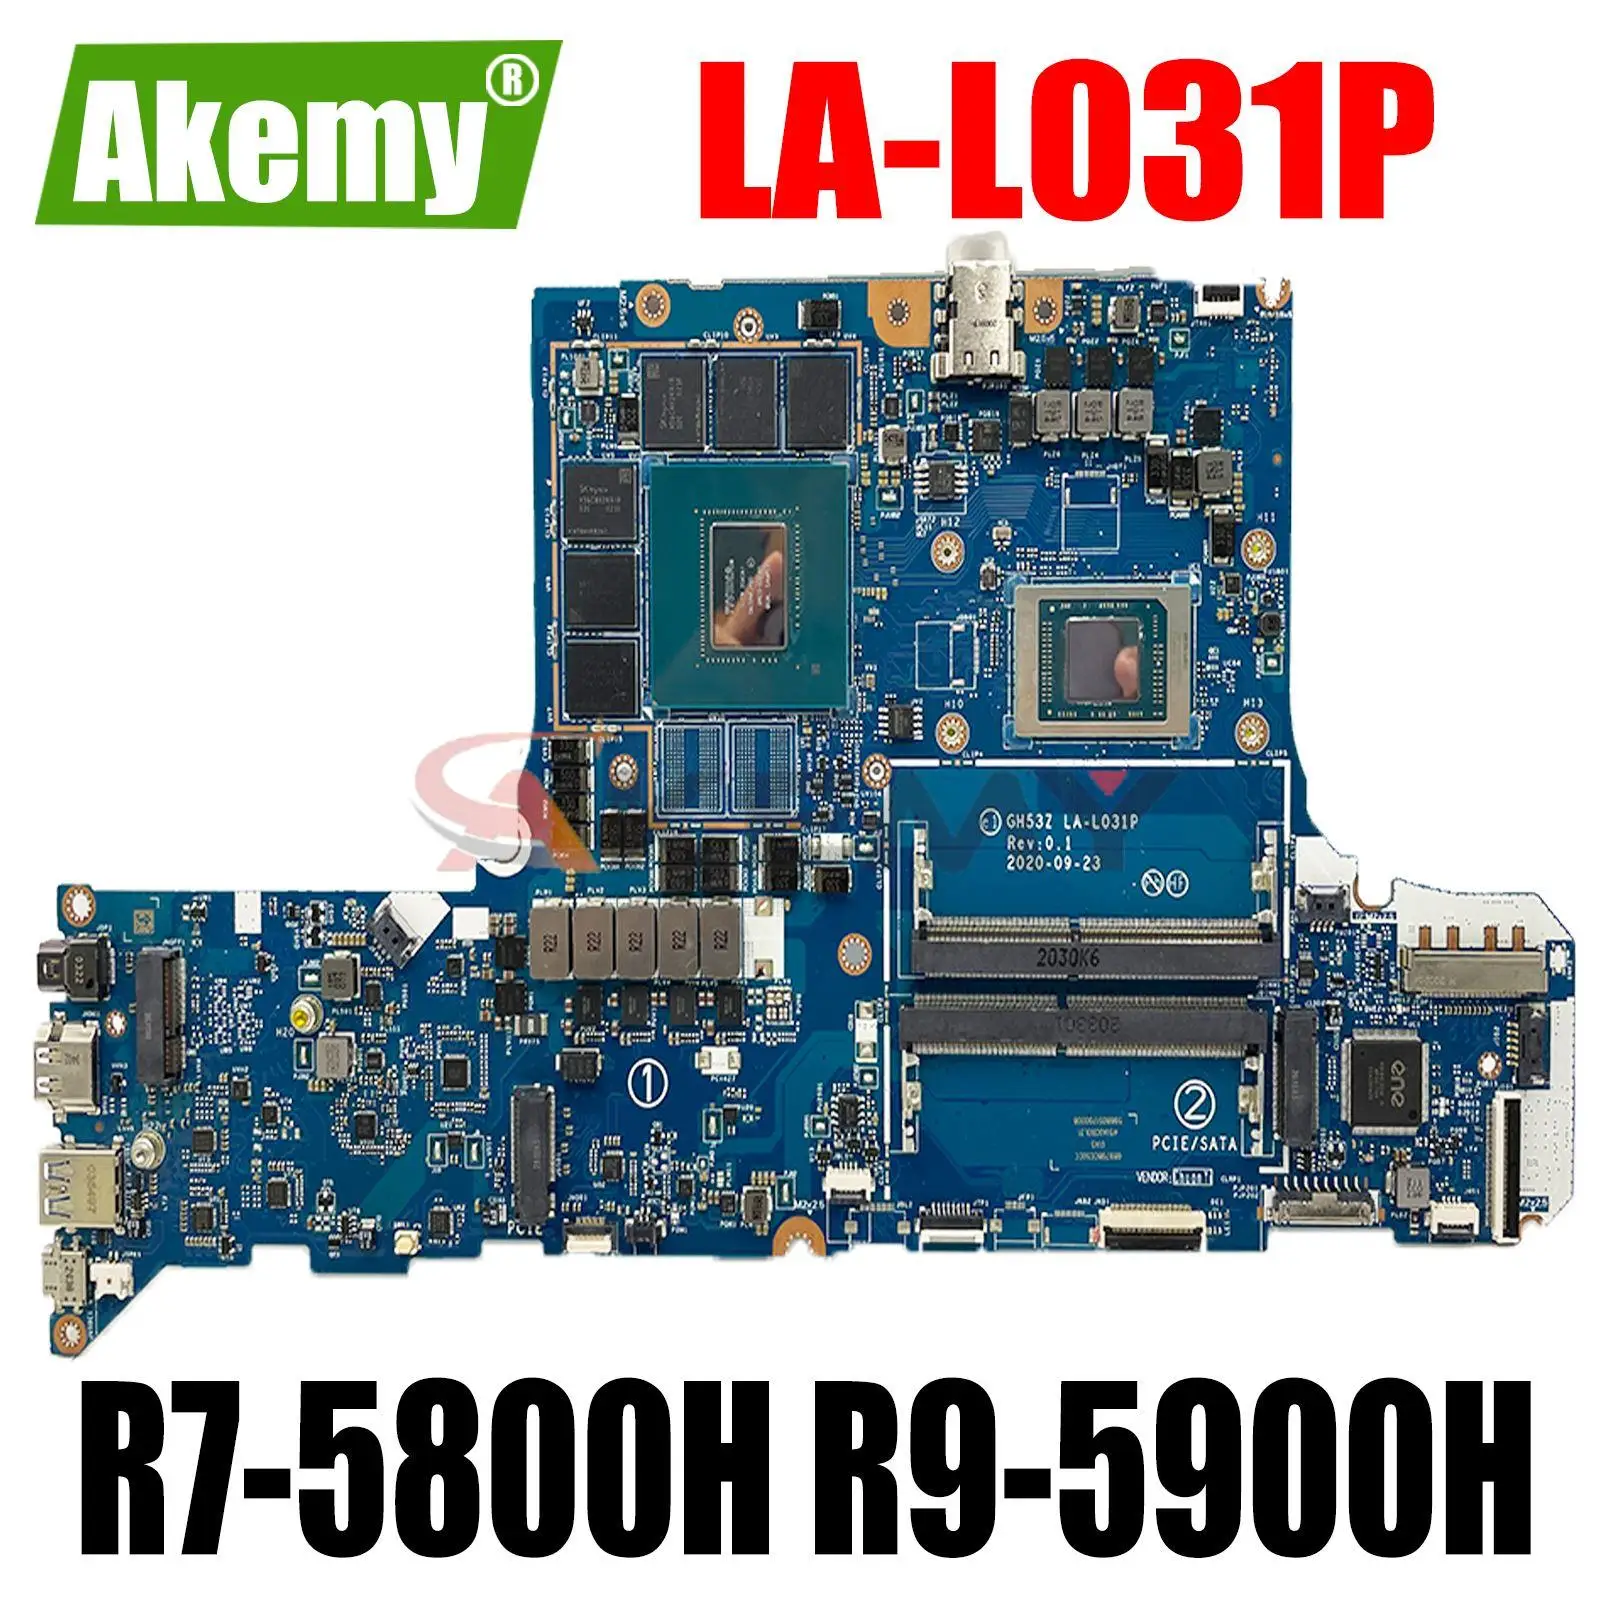 

LA-L031P Motherboard for Acer AN515-45 AN517-41 Laptop Motherboard with R7-5800H R9-5900H CPU RTX3060/3070/3080 GPU DDR4 Tested